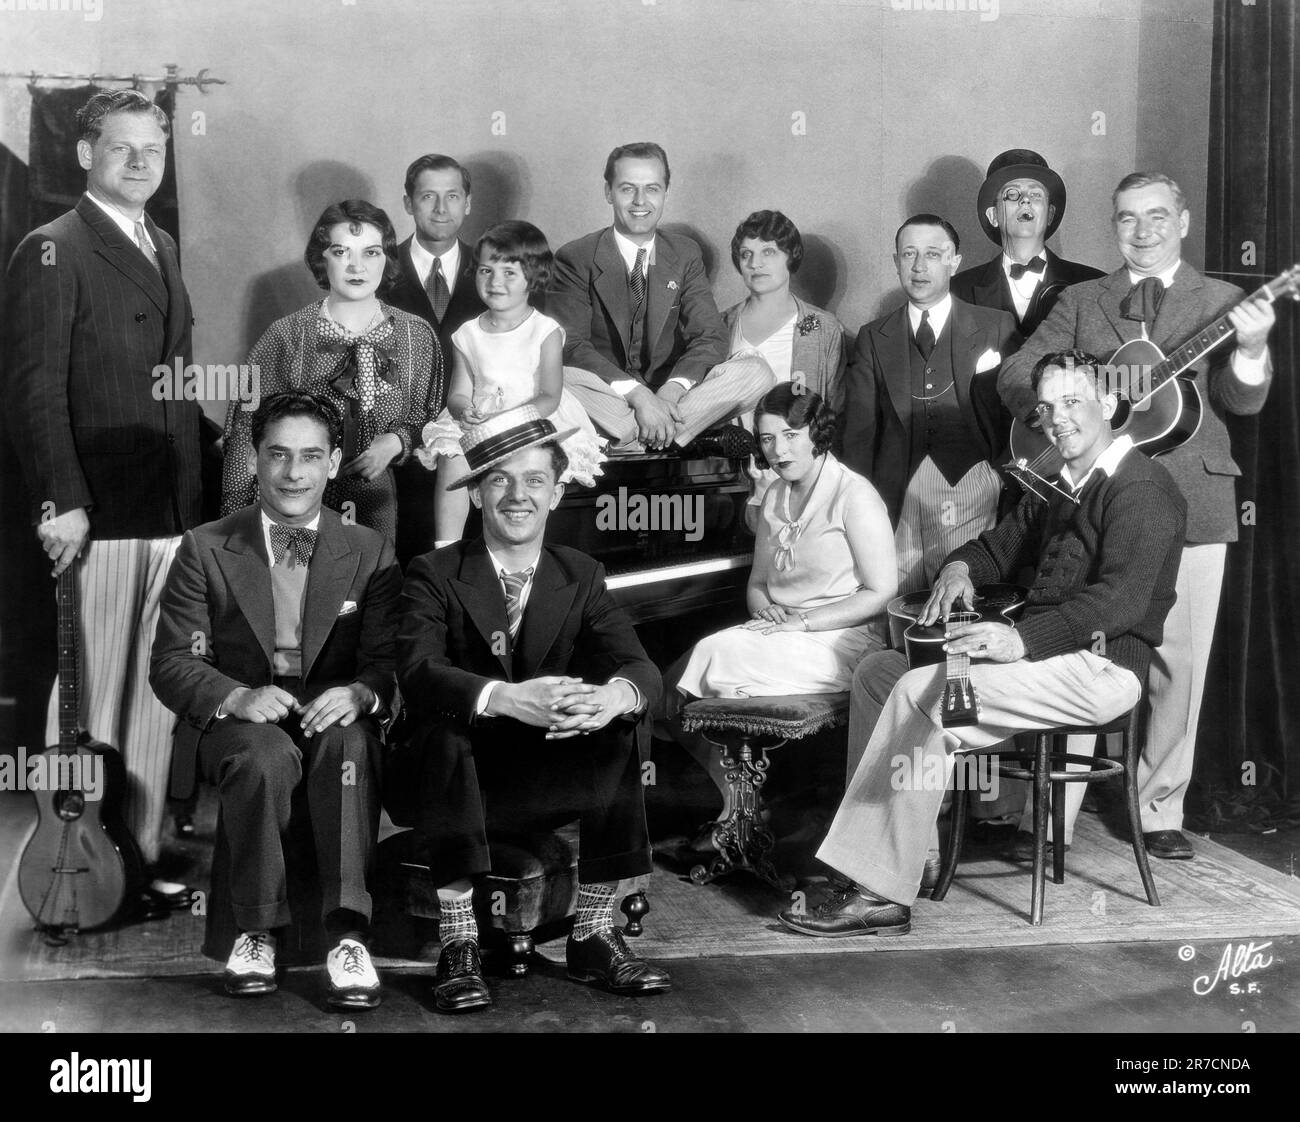 San Francisco, California, 1930. The 'Happy Go Lucky Hour' on KFRC Radio with standing, (L-R): Al Pearce, Edna O'Keefe, Cal Pearce, Jean Clarnioux, Norman Neilsen, Hazel Warner, Abe Bloom, Monroe Upton as Lord Bilgewater and Harry 'Mac' McClintock, and seated, (L-R): Tommy Harris, Charles Carter, Edna Fisher, and Cecil Wright Stock Photo